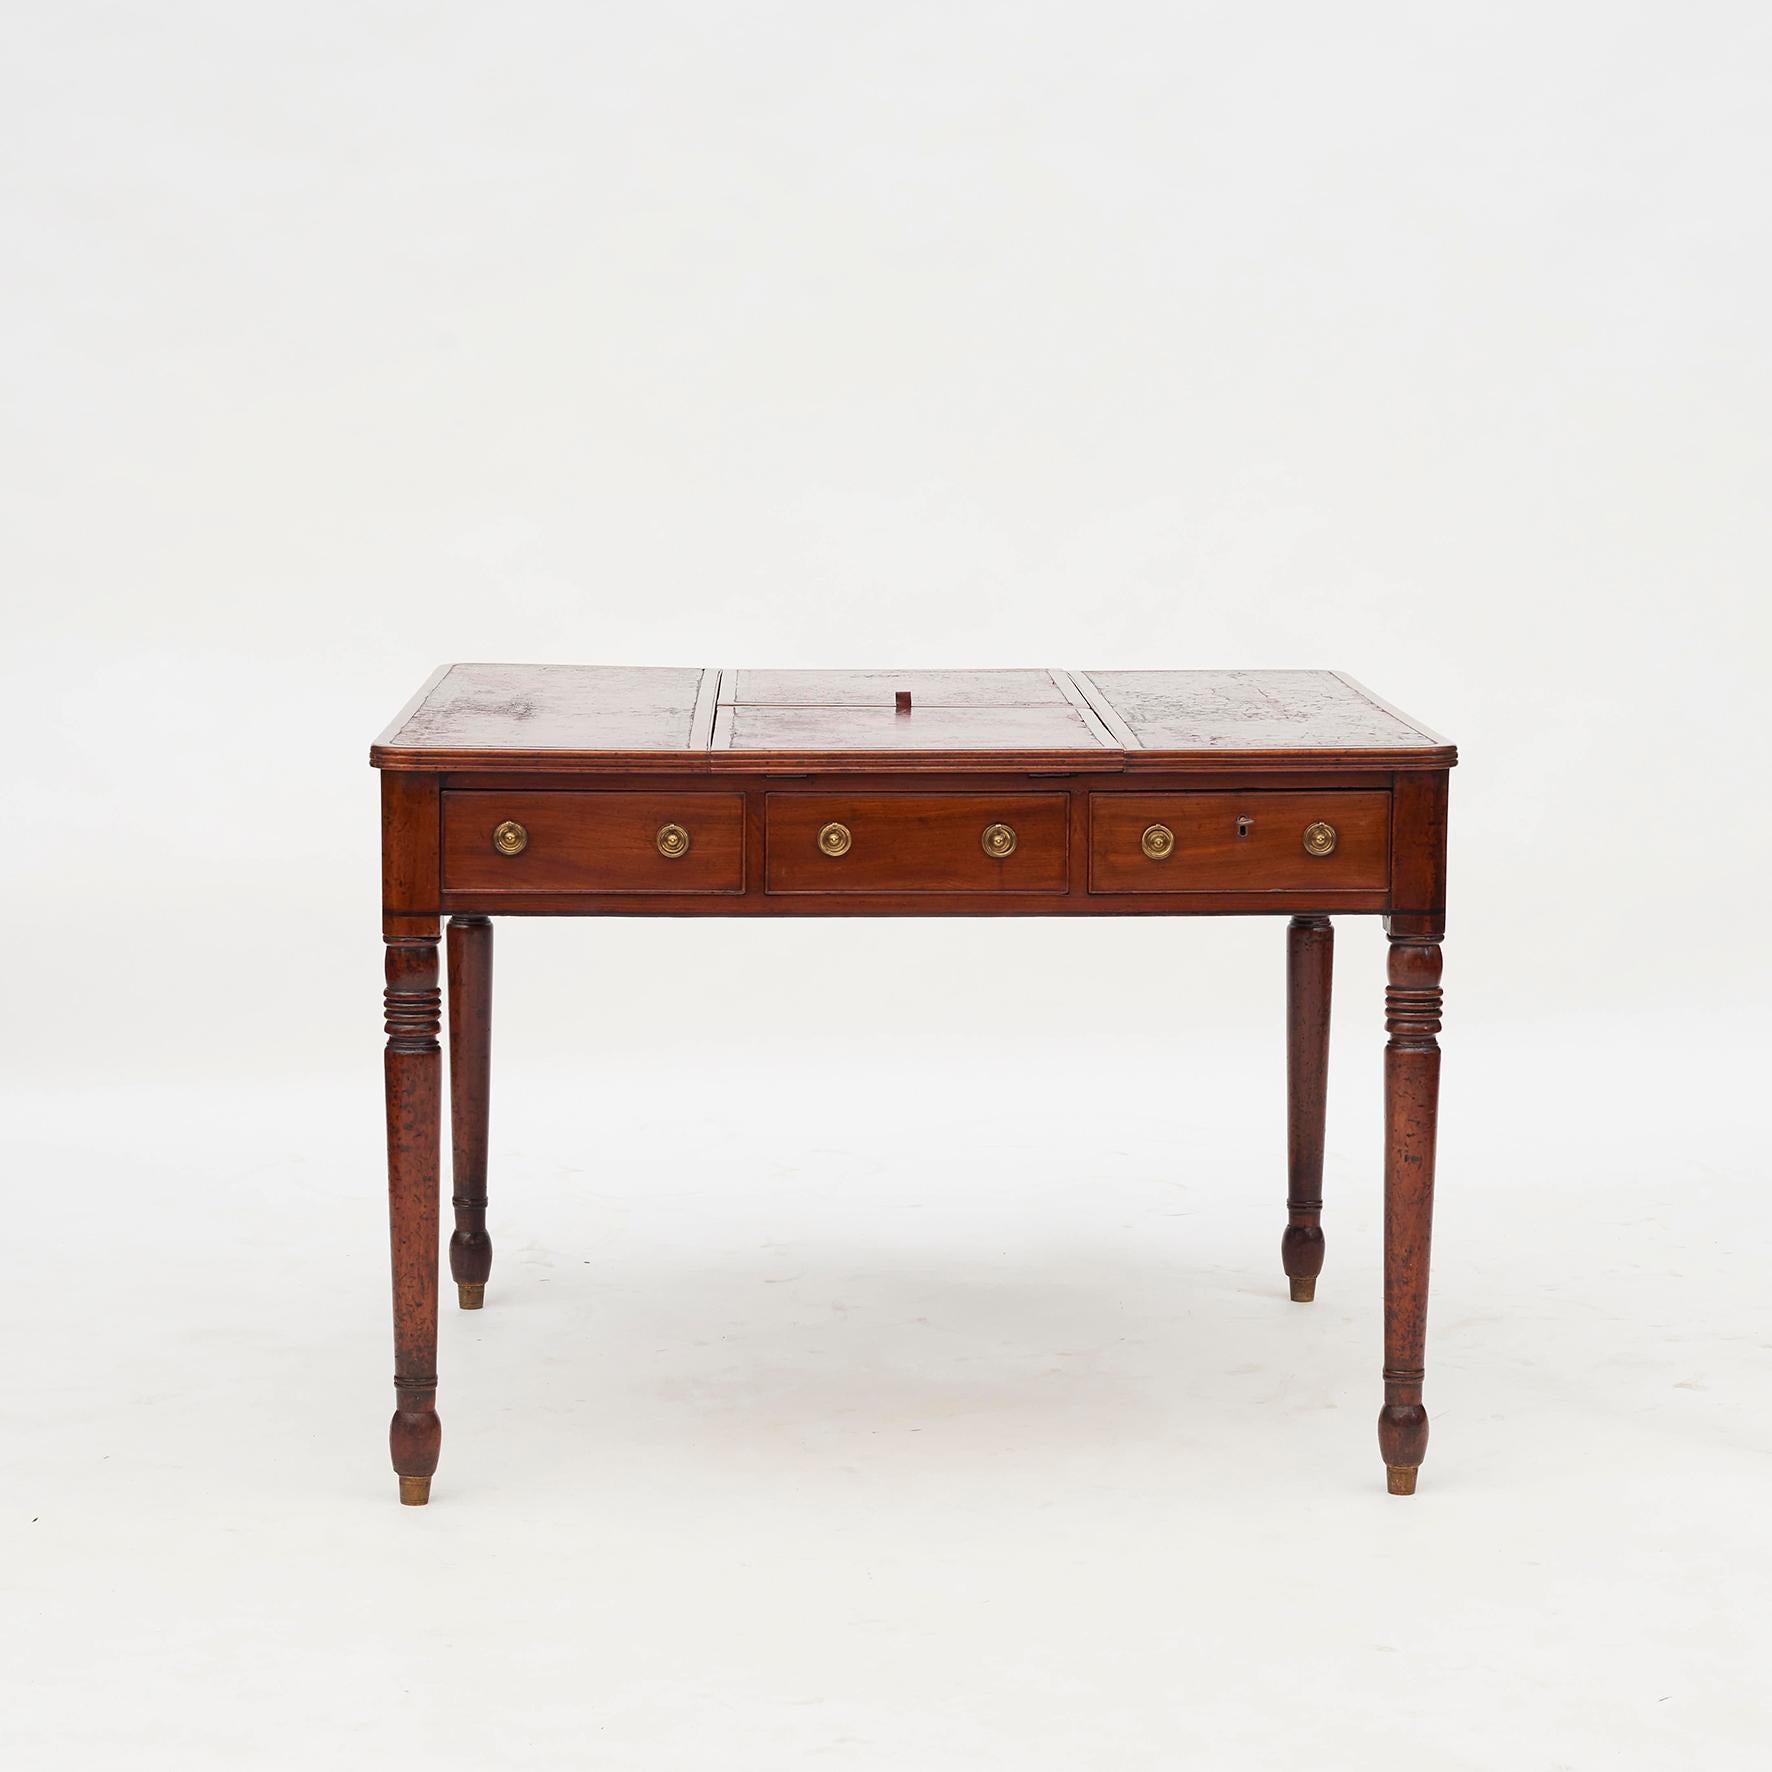 Elegant 'Lady' partners desk in mahogany. Drawers on both sides. One lockable drawer with key. Pair of lifting writing surfaces. The two writing surfaces on each side can be raised or lowered (tilted) as required for comfort when you are working.